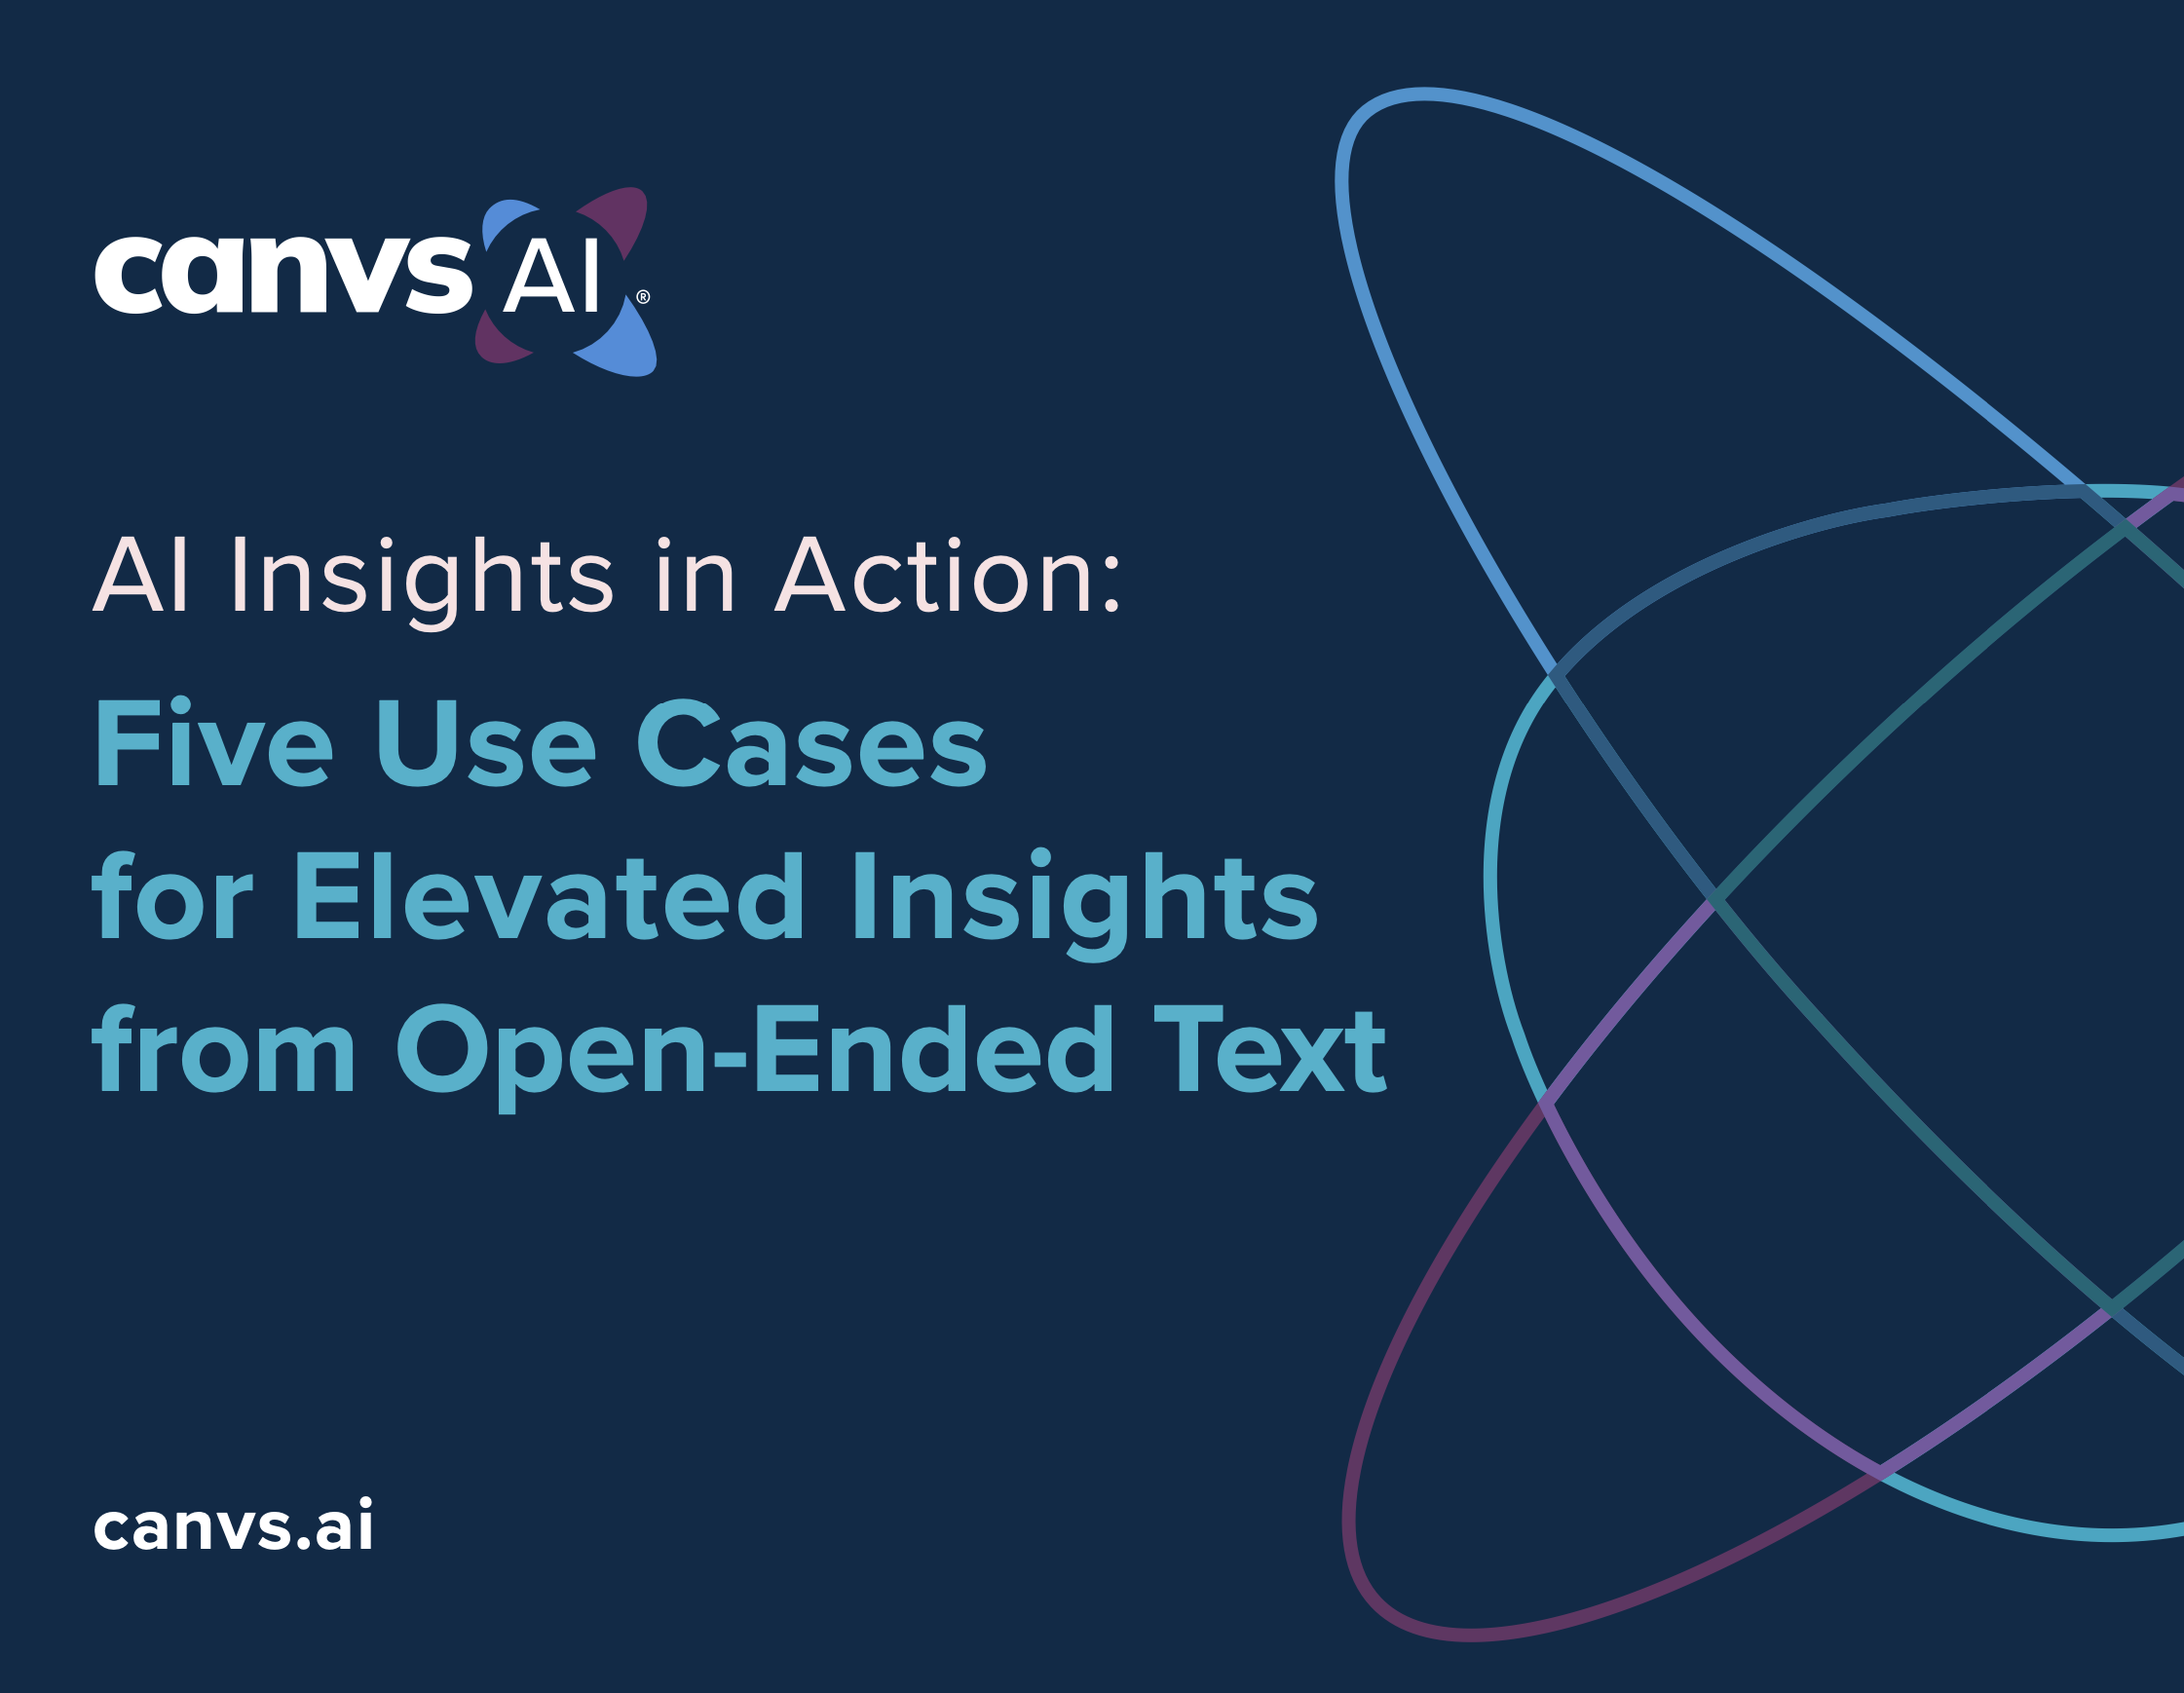 AI Insights in Action: Five Use Cases for Elevated Insights from Open-Ended Text